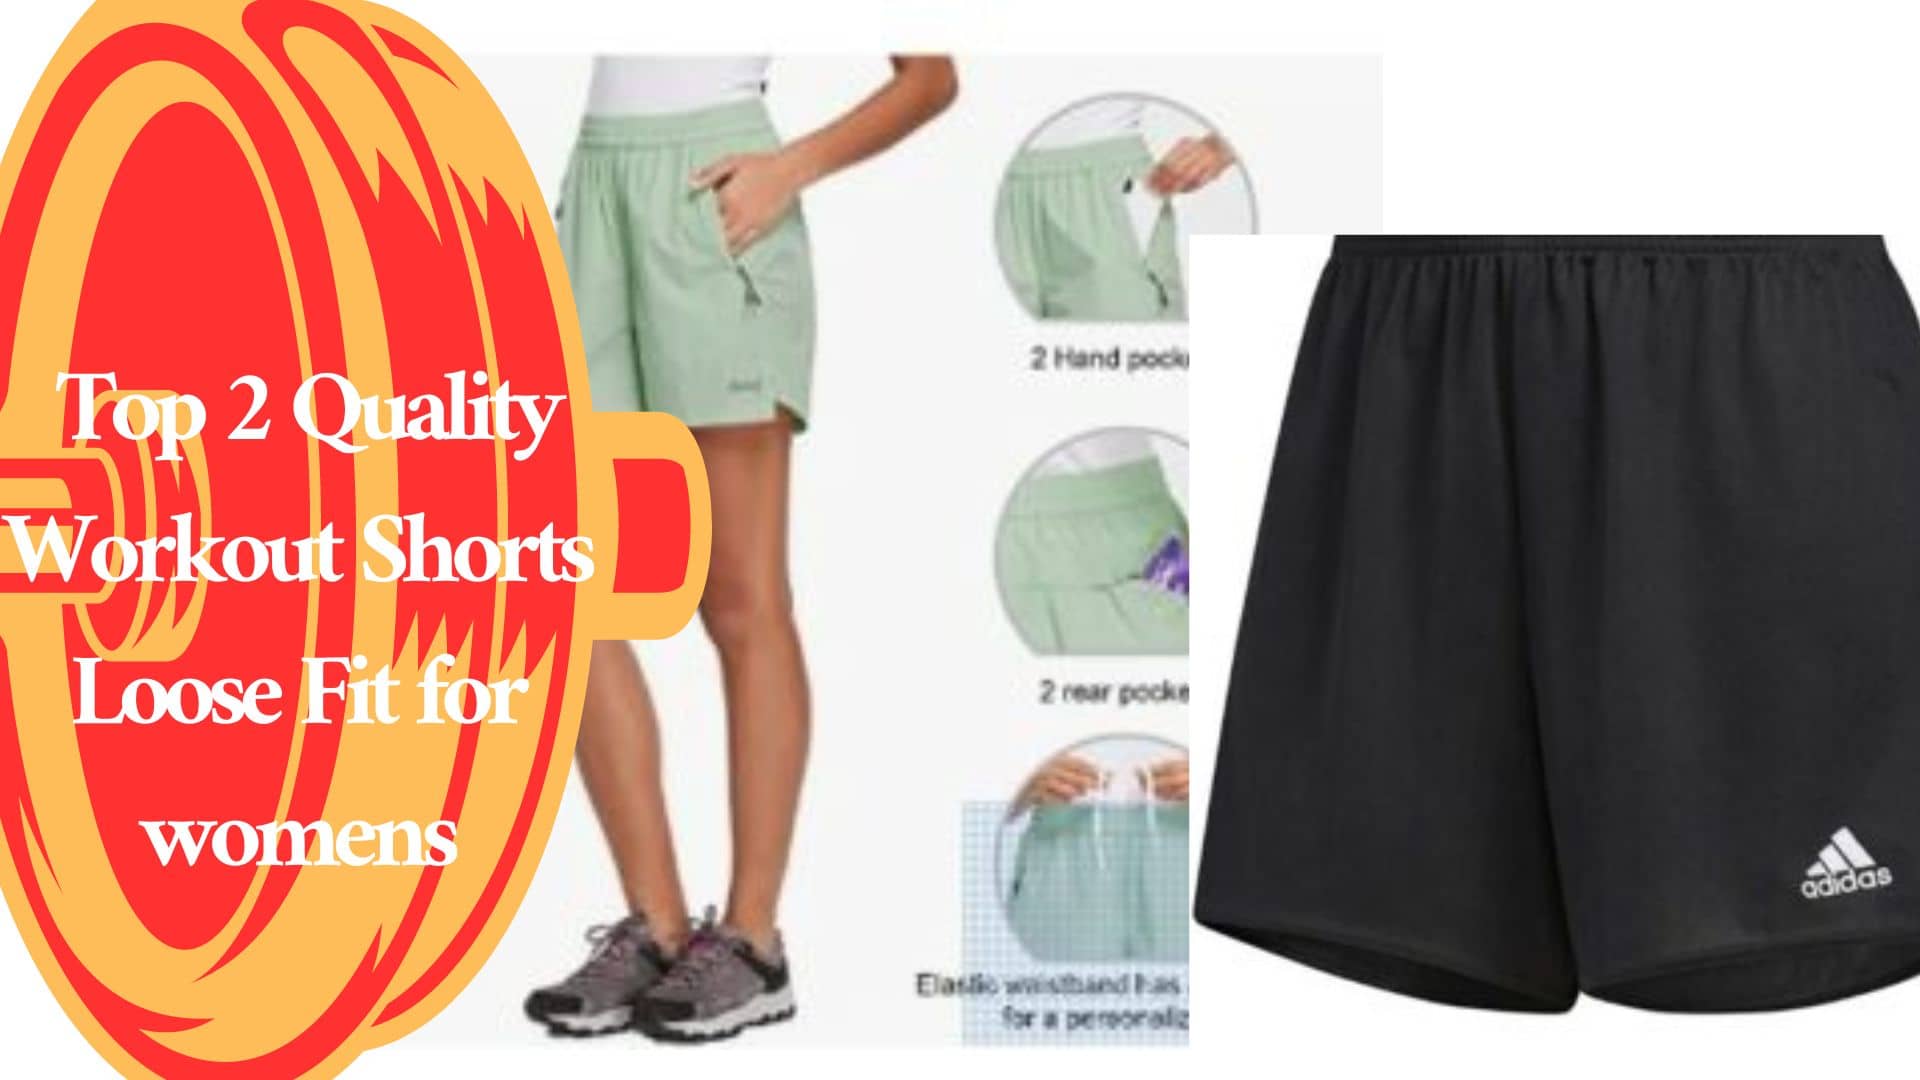 Top 2 Quality Workout Shorts Loose Fit for womens